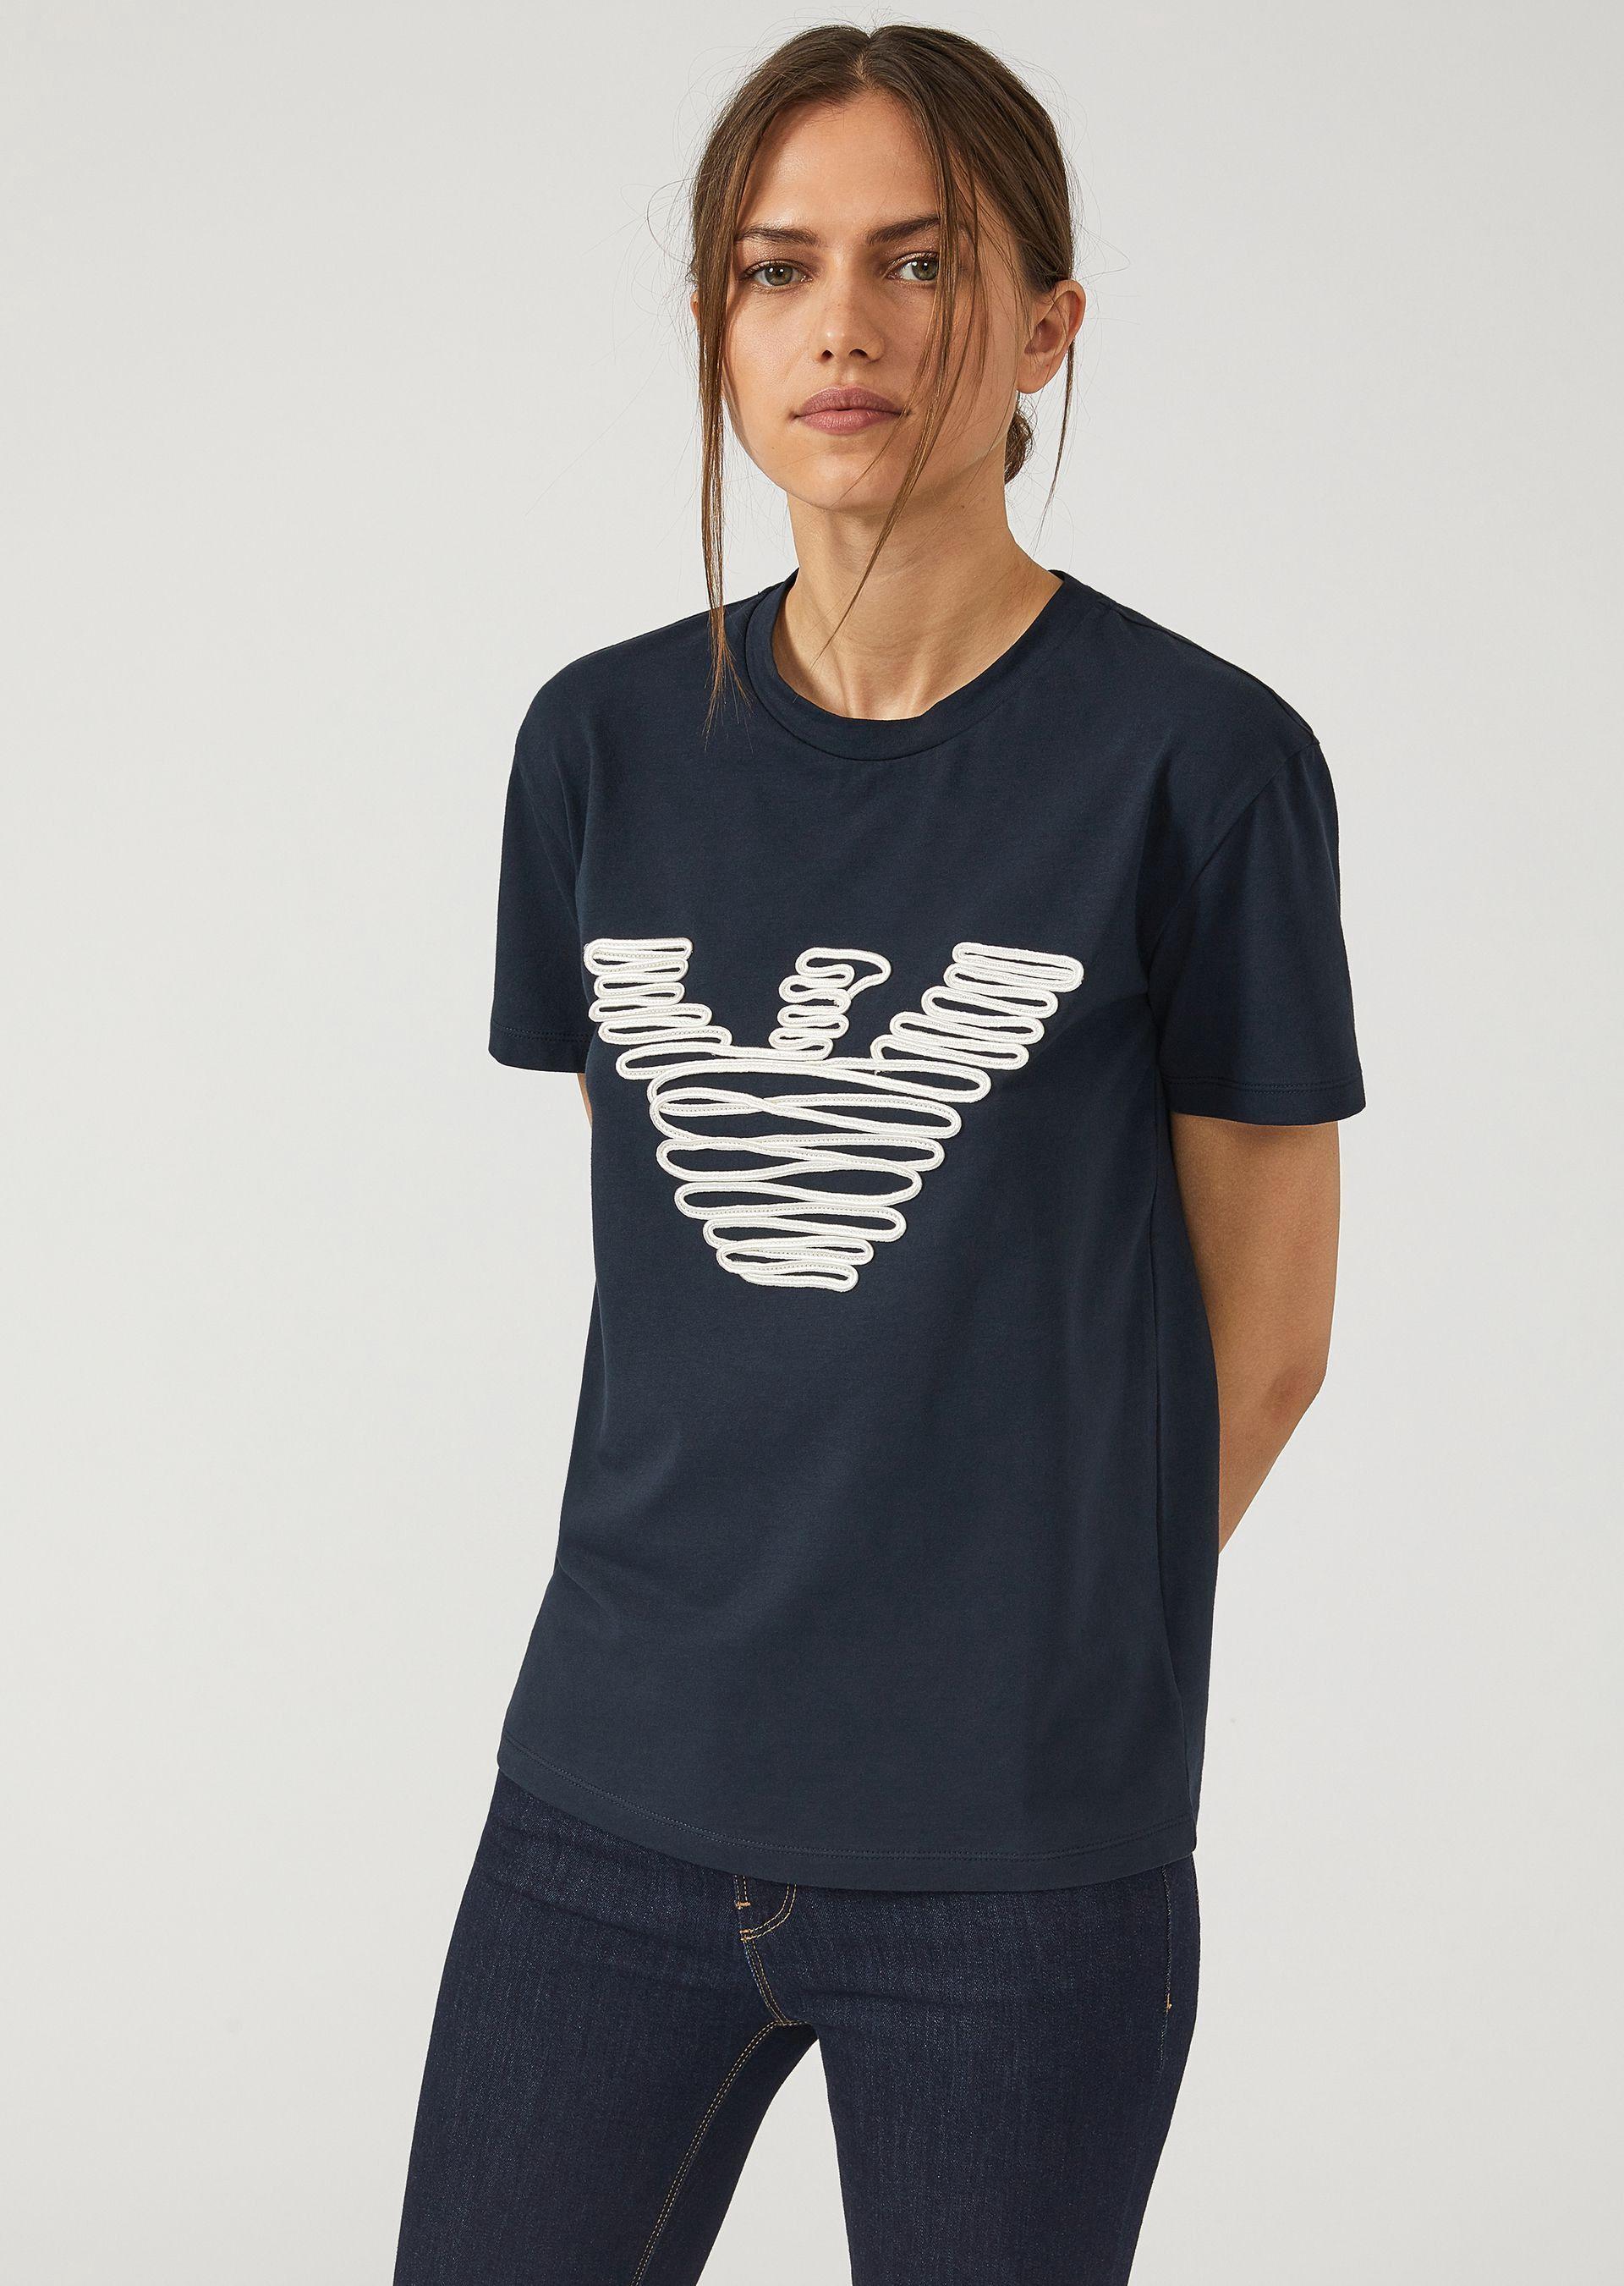 Navy Blue Spiral Logo - Emporio Armani T-Shirt In Jersey With Spiral Embroidered Logo - Navy ...